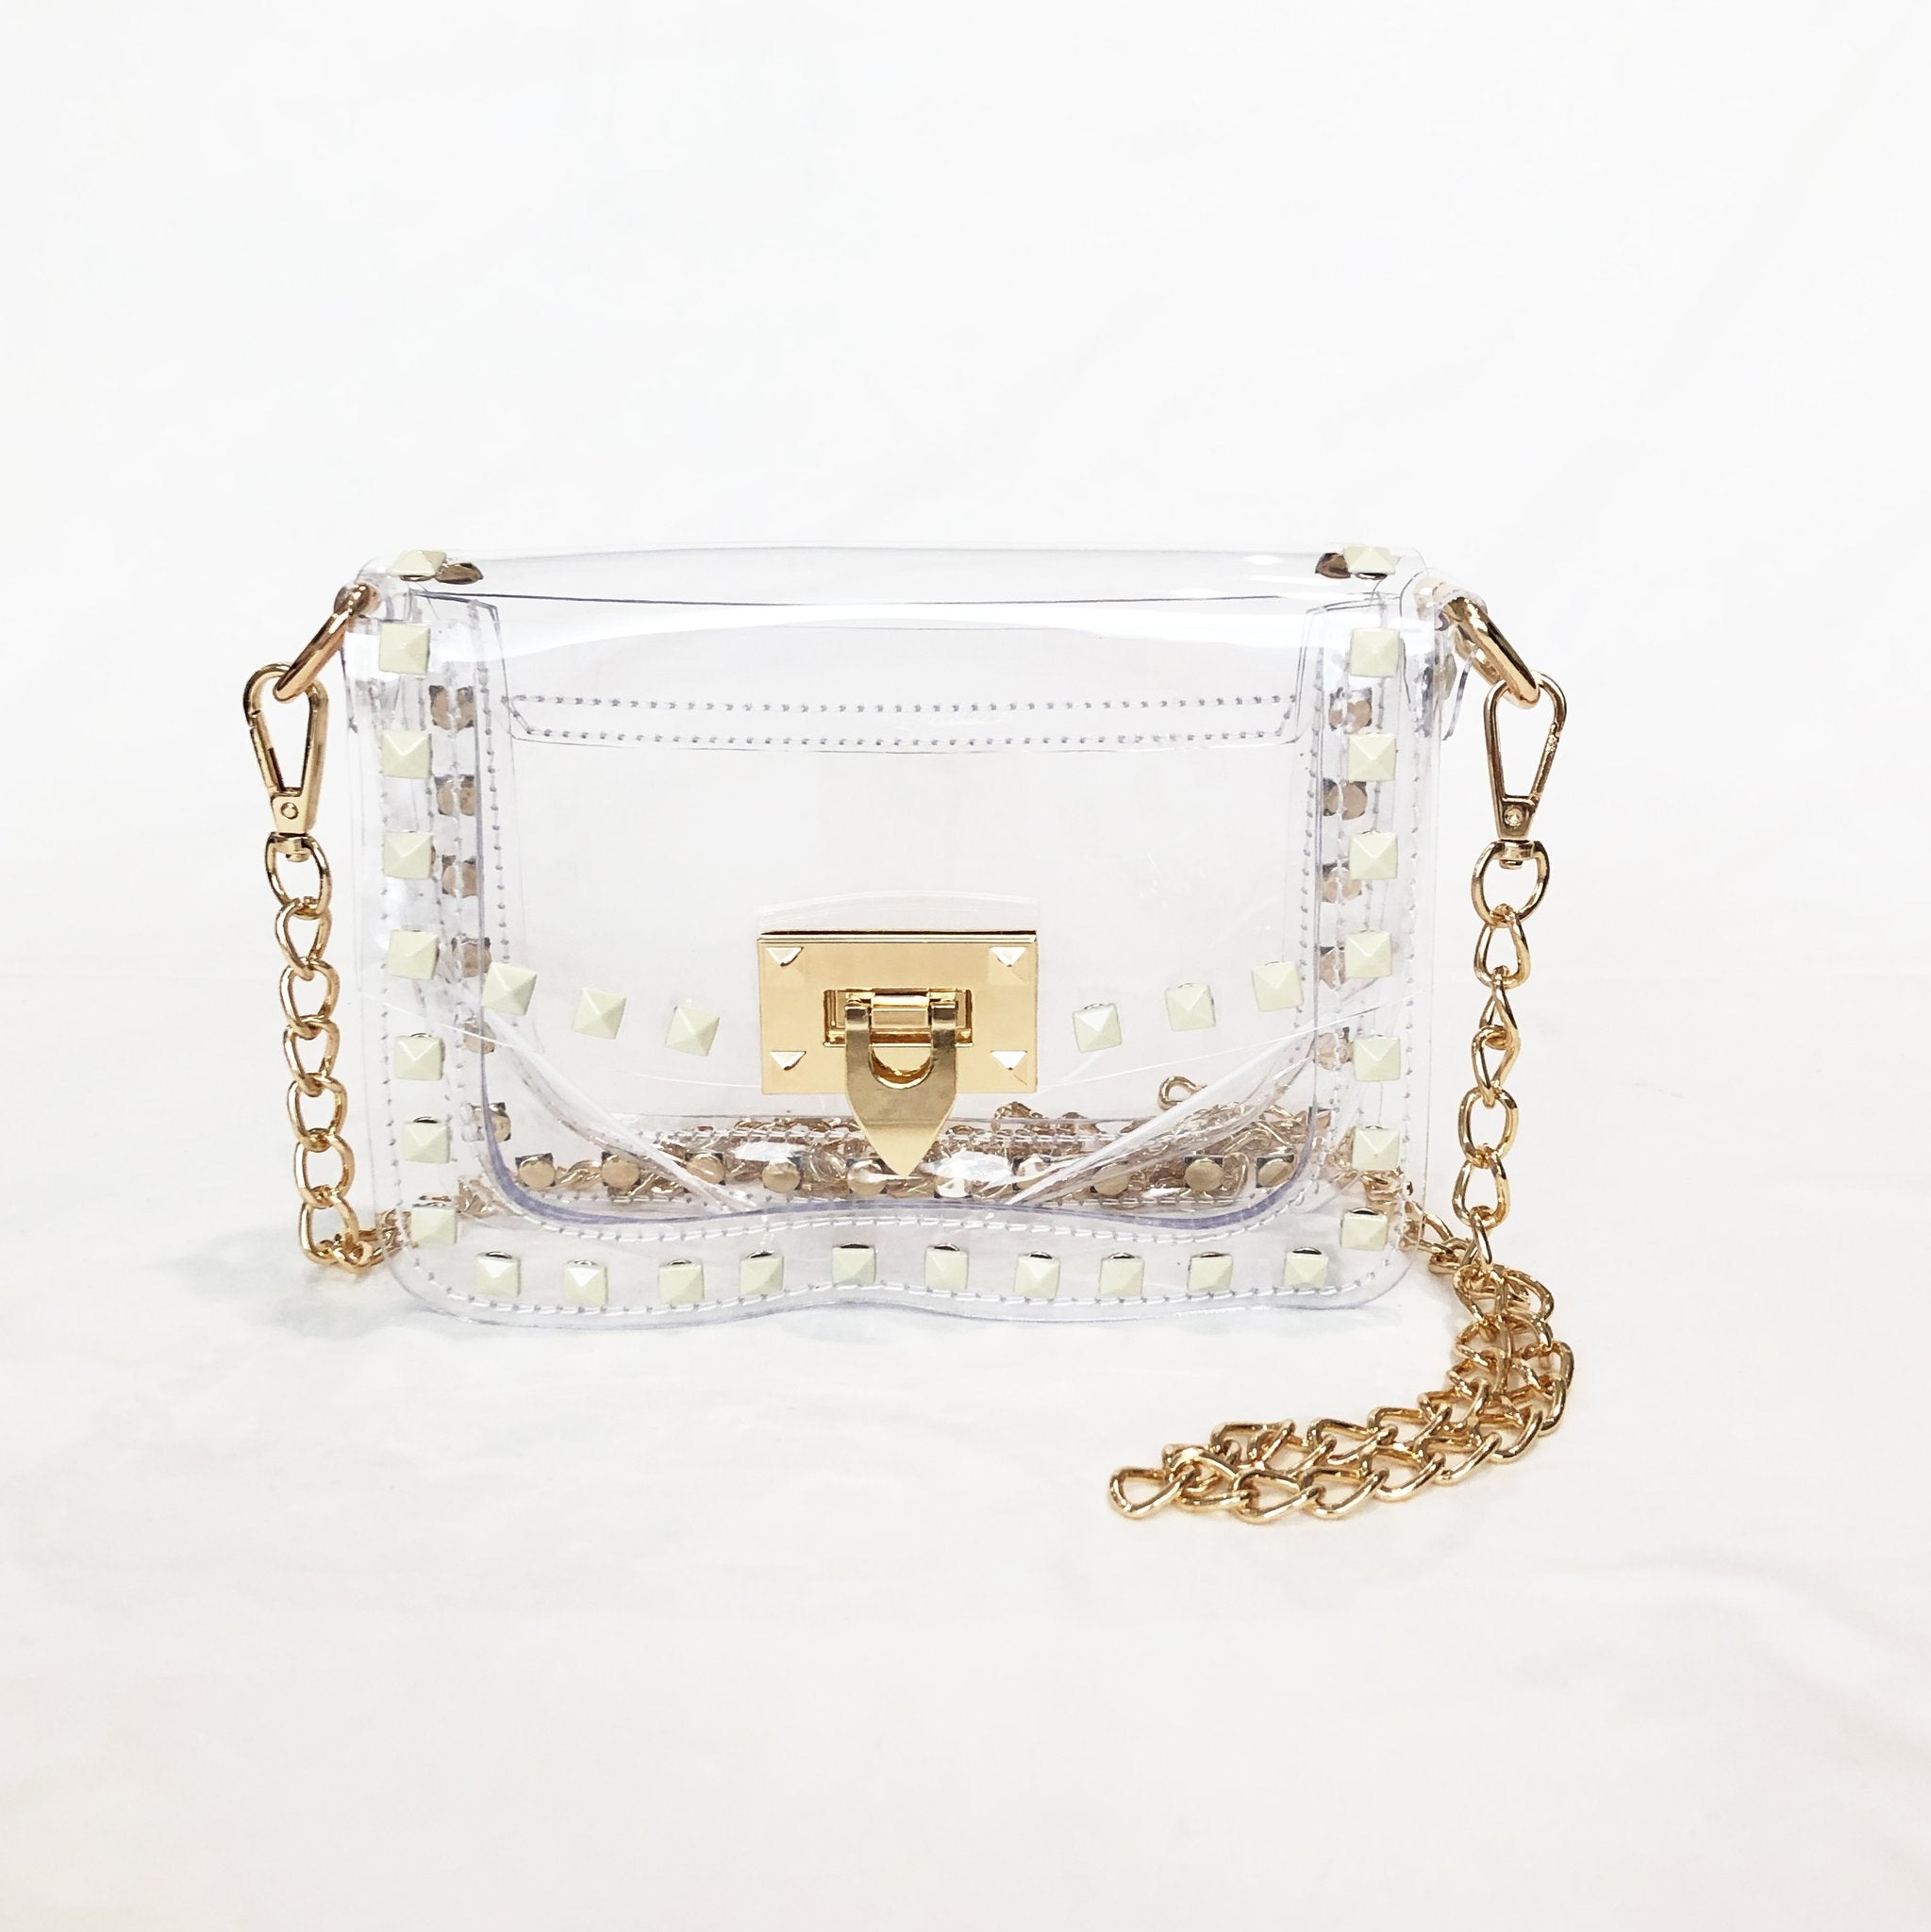 CHANEL | GOLD METIERS D'ART MEDALLION CHAIN BAG IN GOLD TONE METAL OVER GOLD  LEATHER POUCH, 2018 | Handbags and Accessories | 2020 | Sotheby's